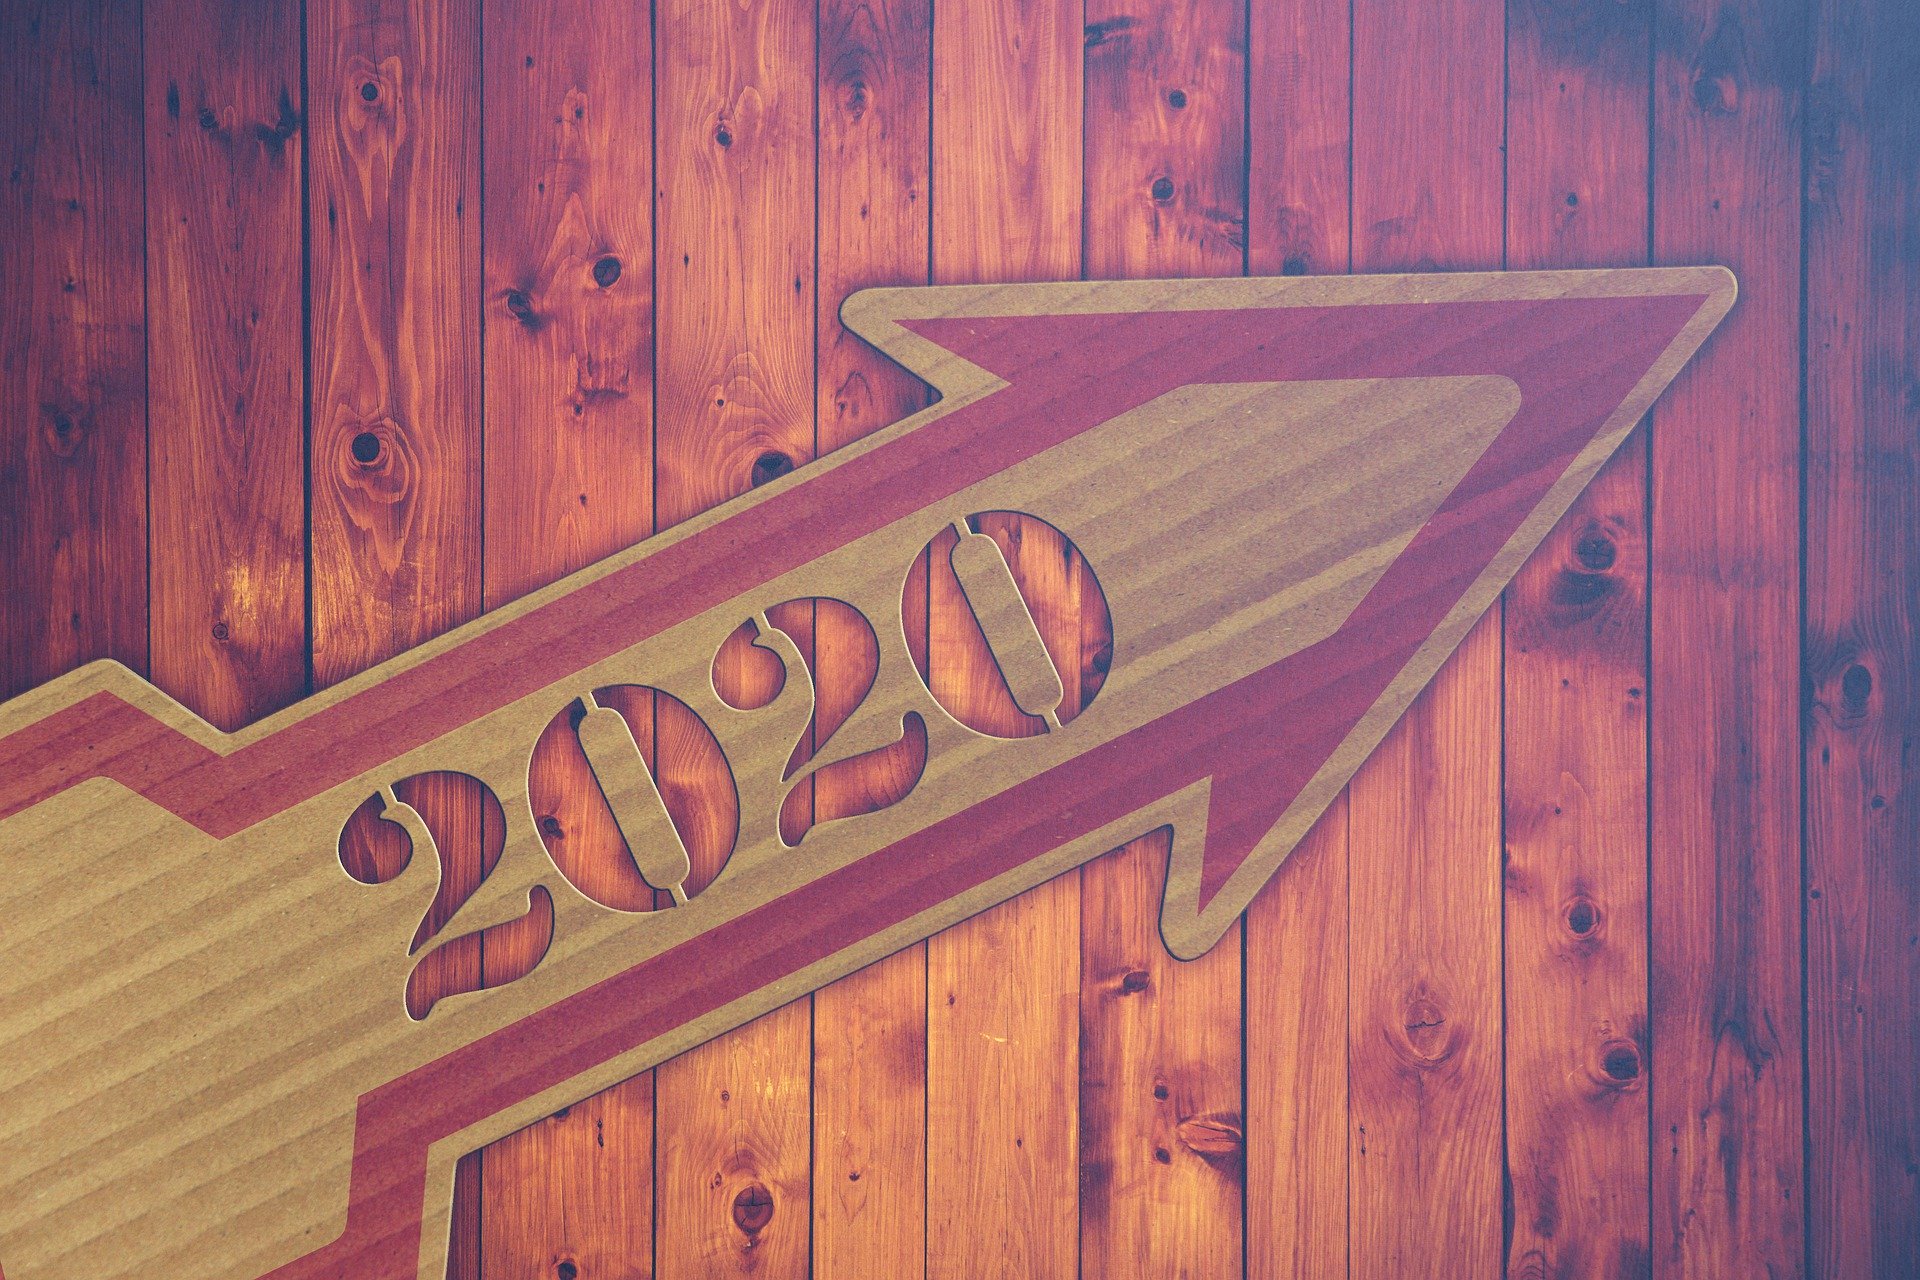 2020 Trends: Expected Changes Coming to the Cannabis Industry in 2020